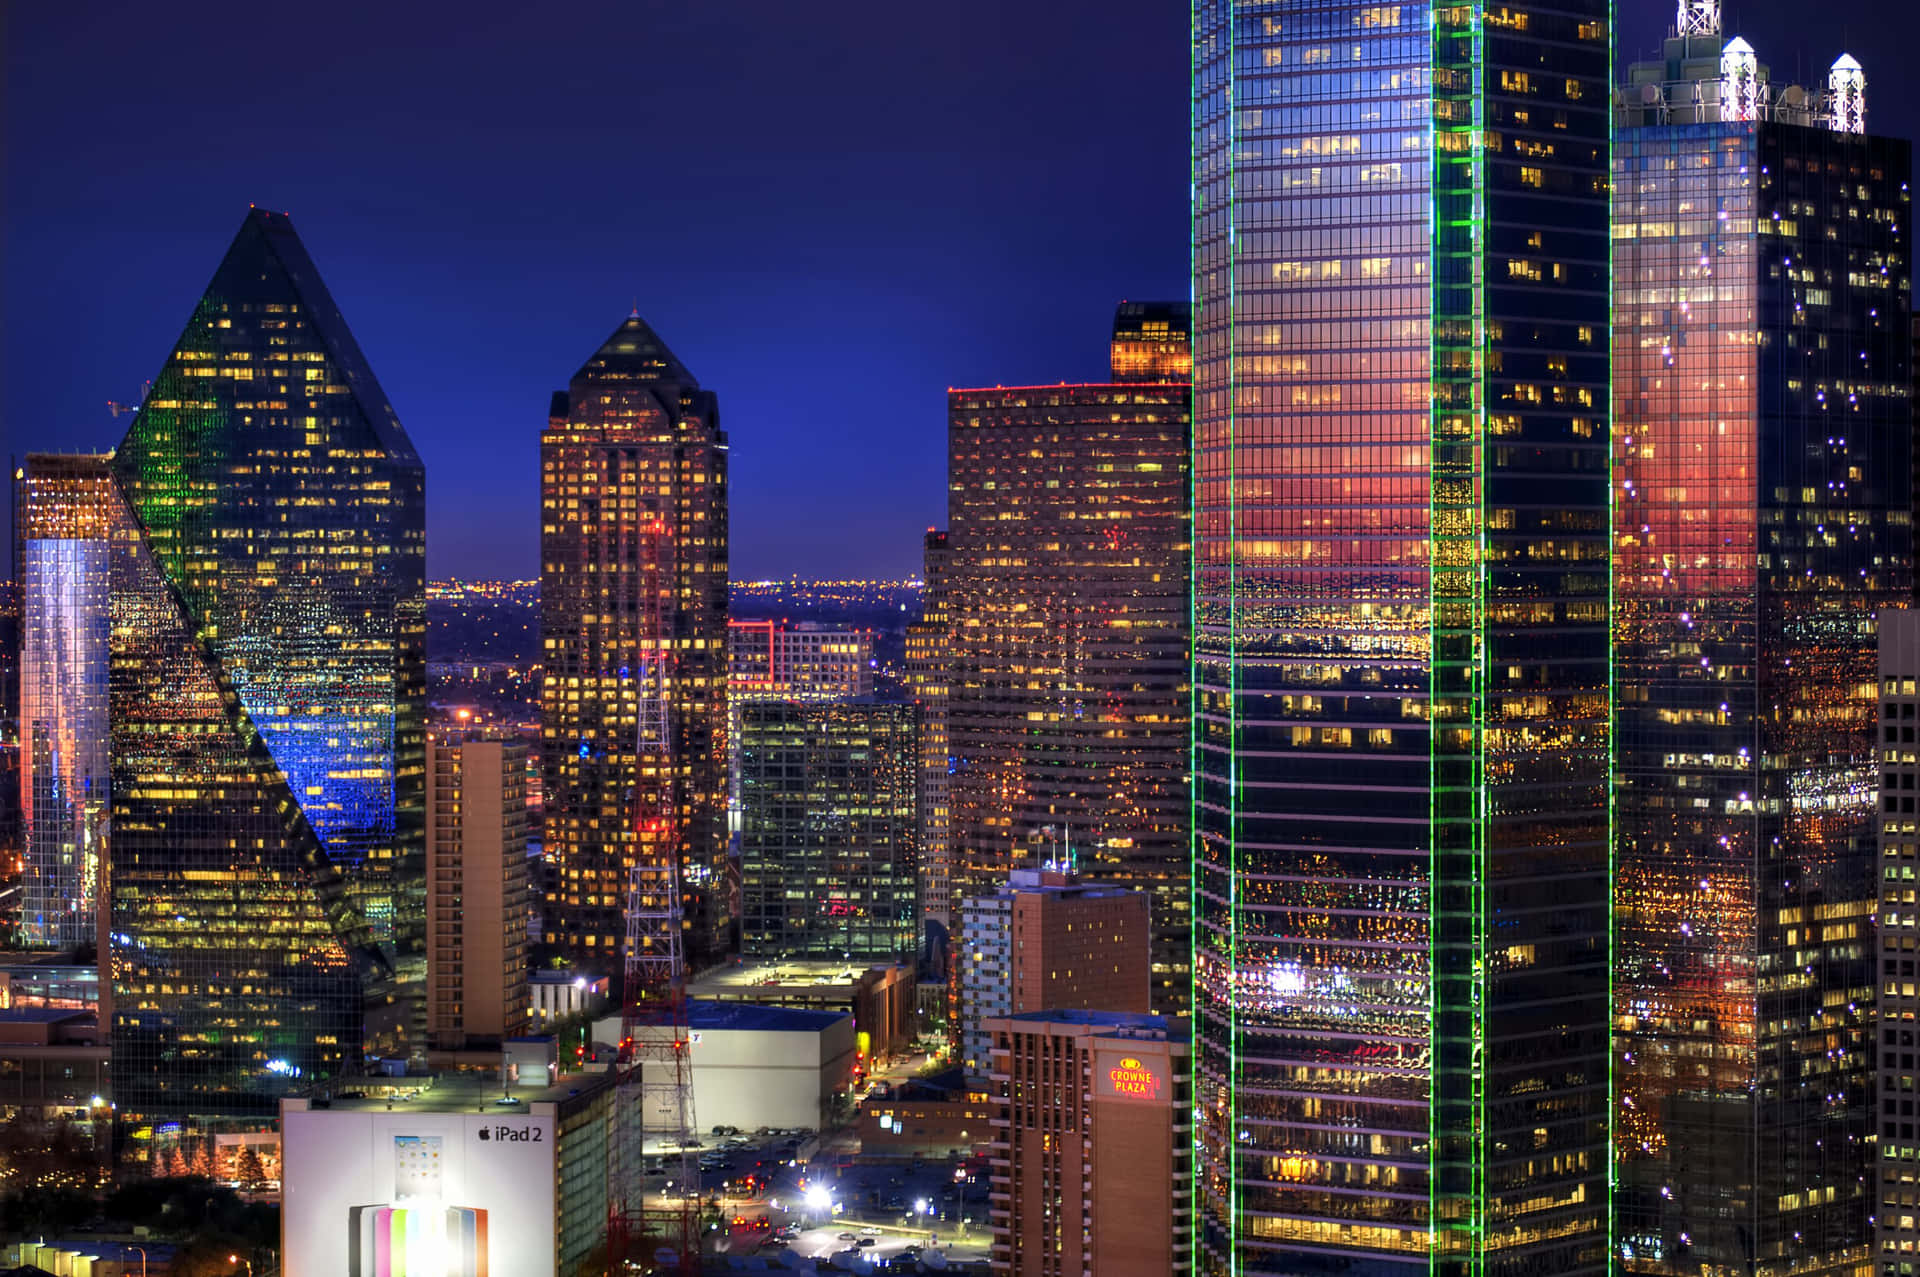 Image Magnificent View Of Downtown Dallas, Texas